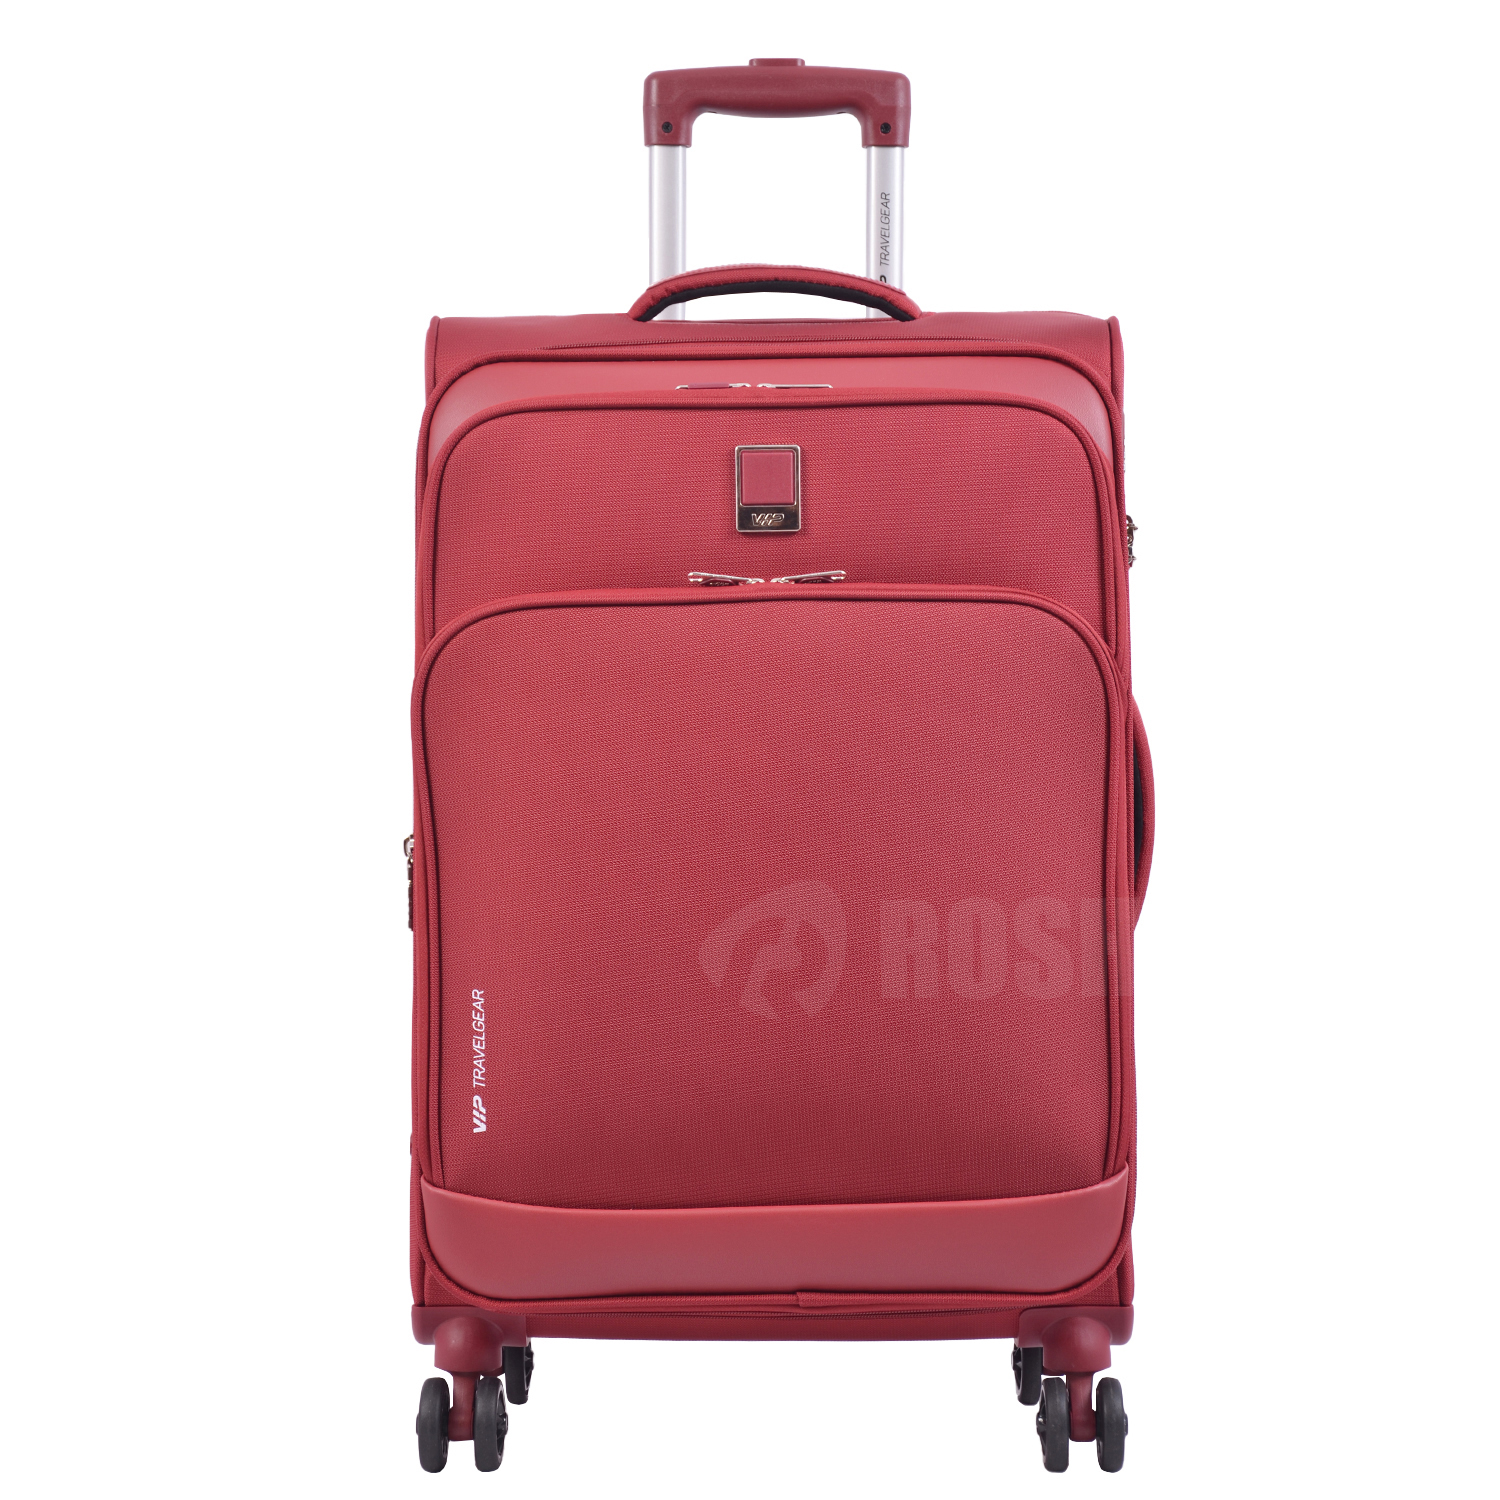 Roshanbags_Productname